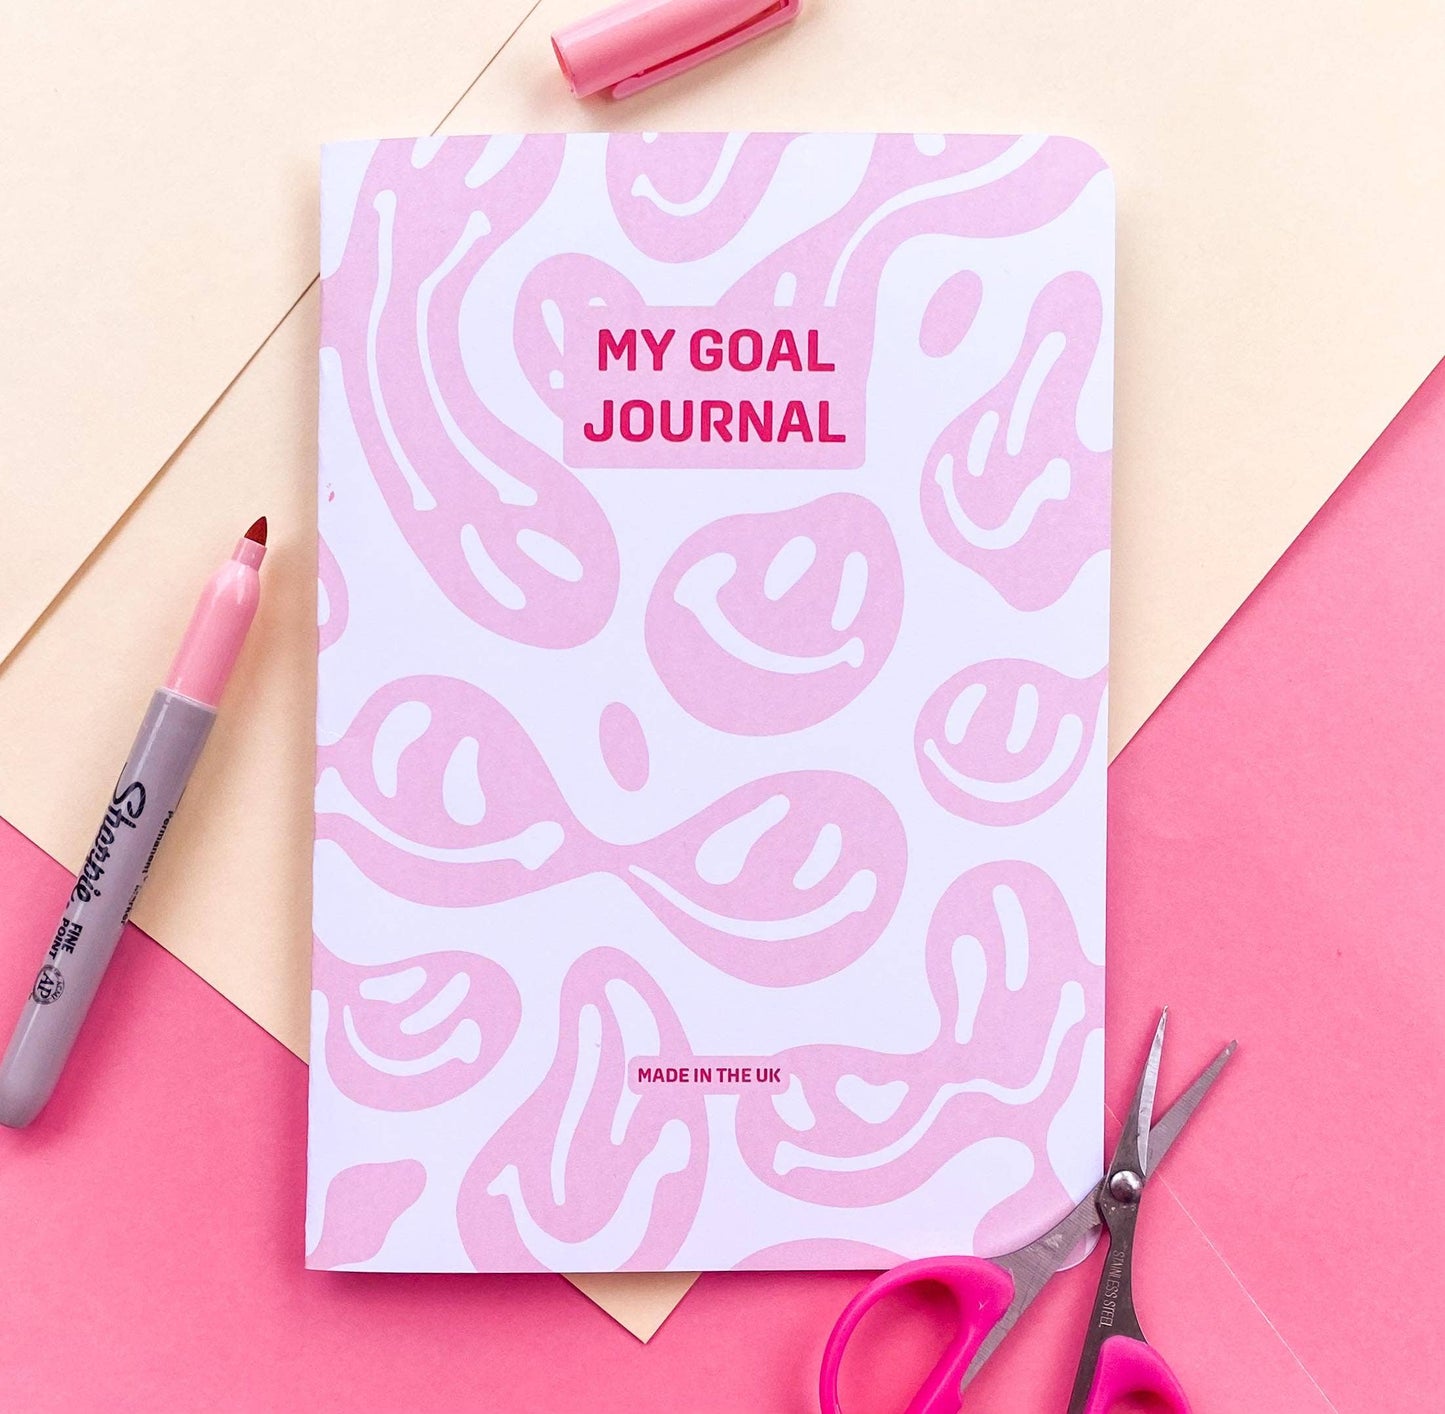 Warped Smiley Faces Goal Journal